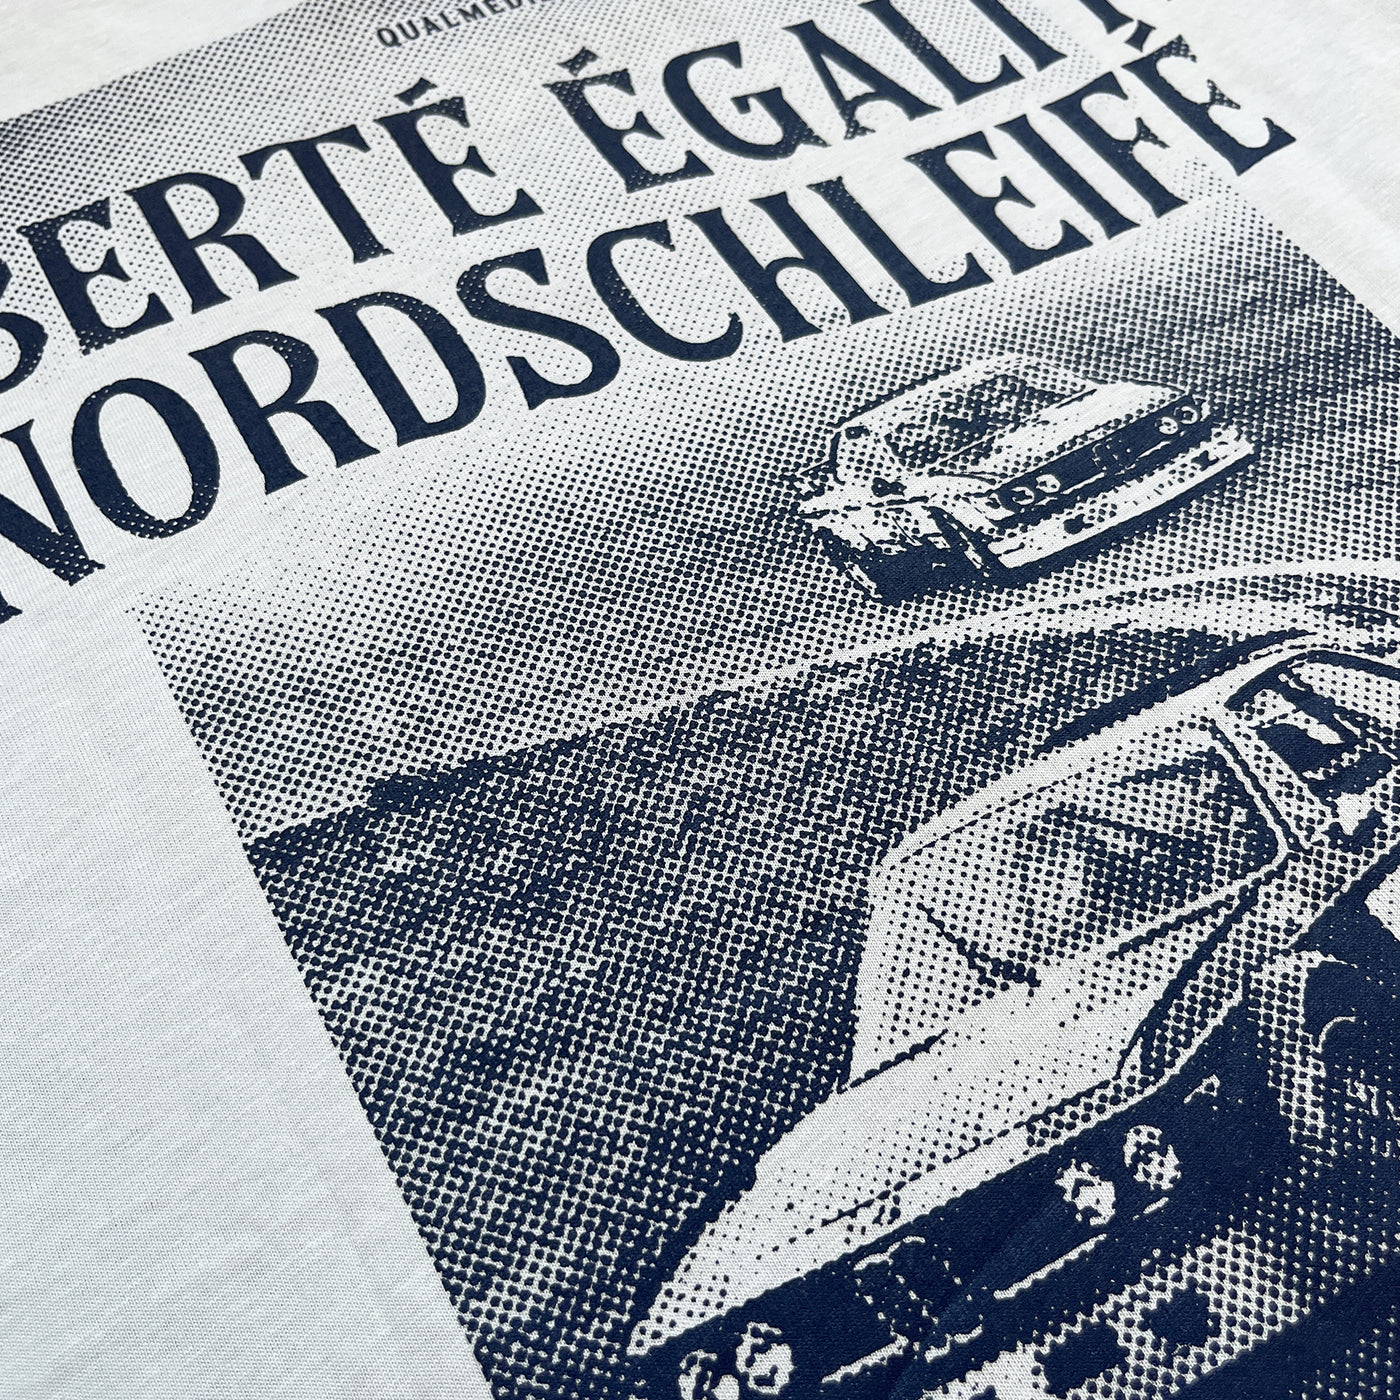 T-SHIRT NORDSCHLEIFE - LIMITED EDITION